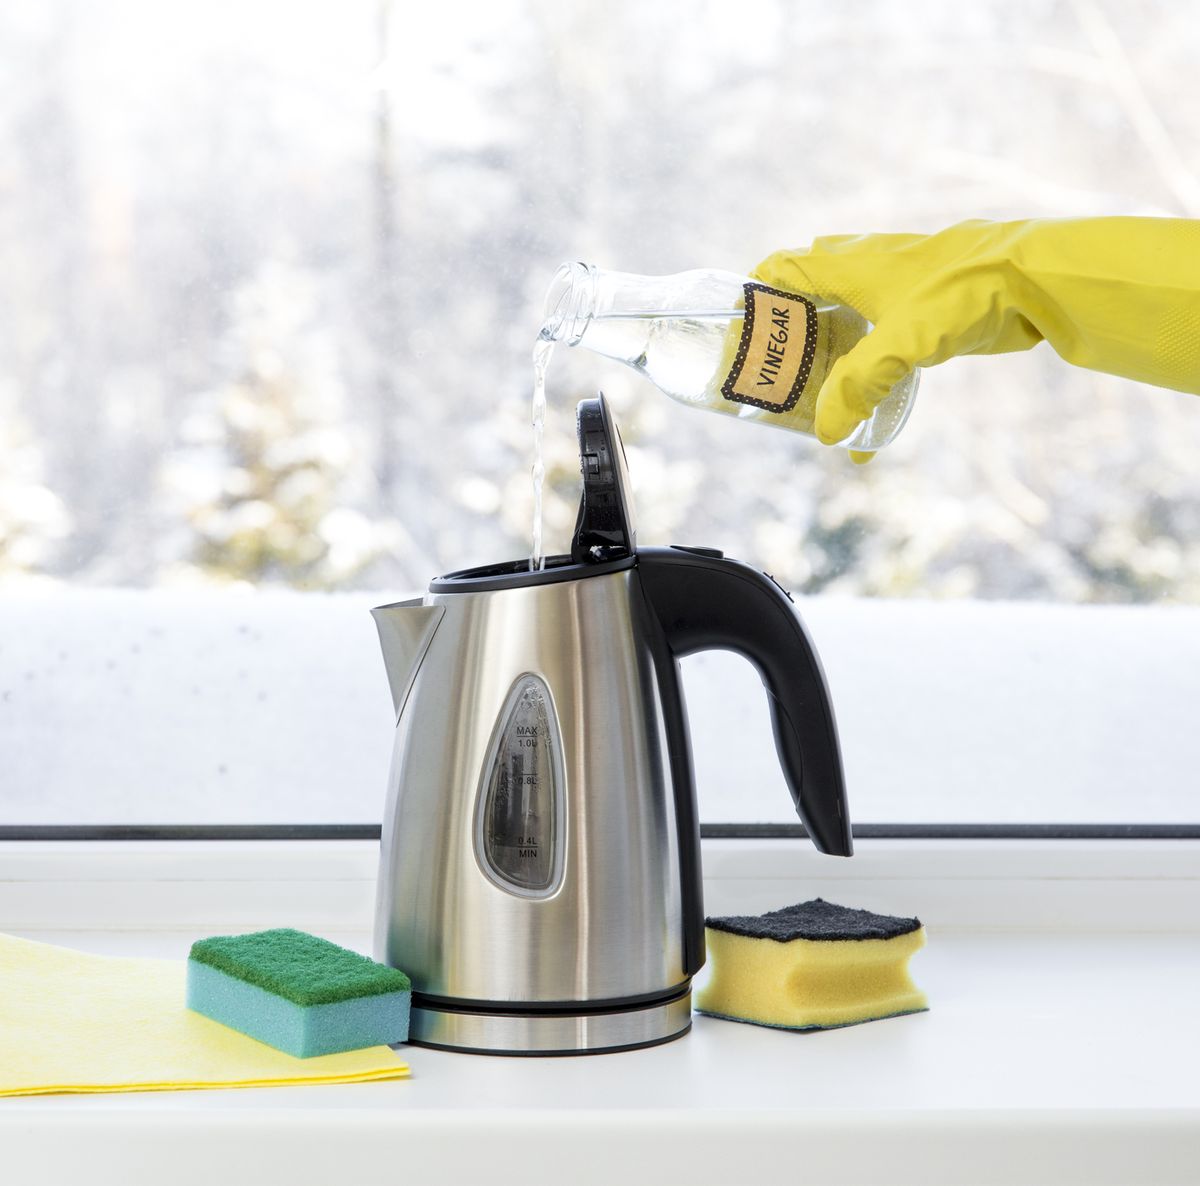 https://hips.hearstapps.com/hmg-prod/images/how-to-clean-an-electric-kettle-1582210366.jpg?crop=0.688xw:1.00xh;0.160xw,0&resize=1200:*